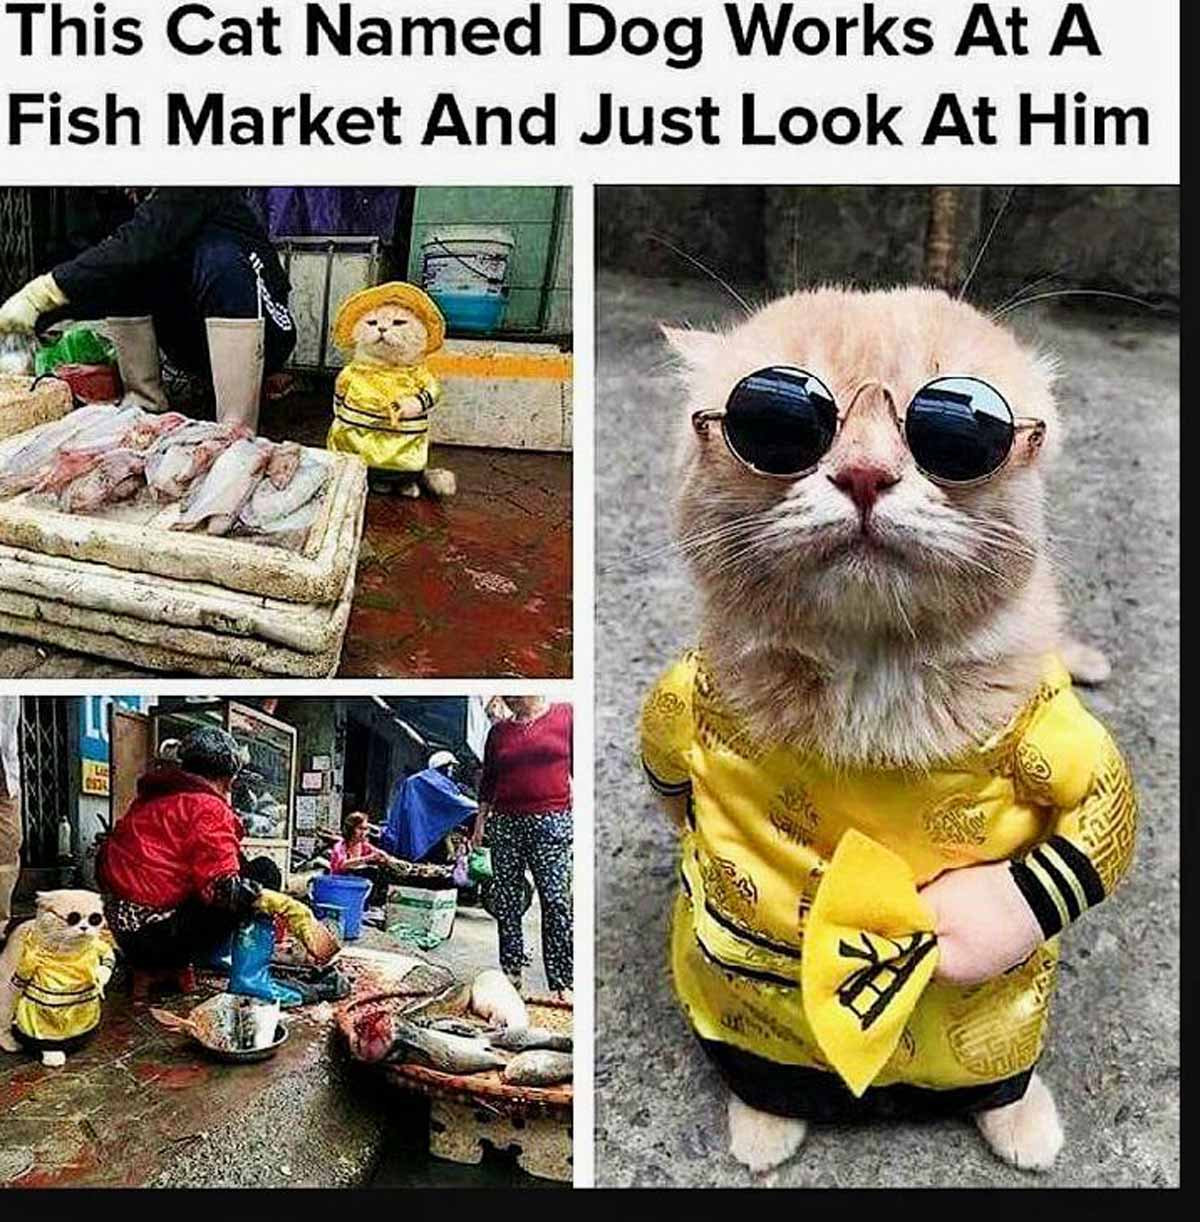 Funny photos of a cat wearing different outfits and wearing round sunglasses with the text 'this cat named dog works at a fish market and just look at him'